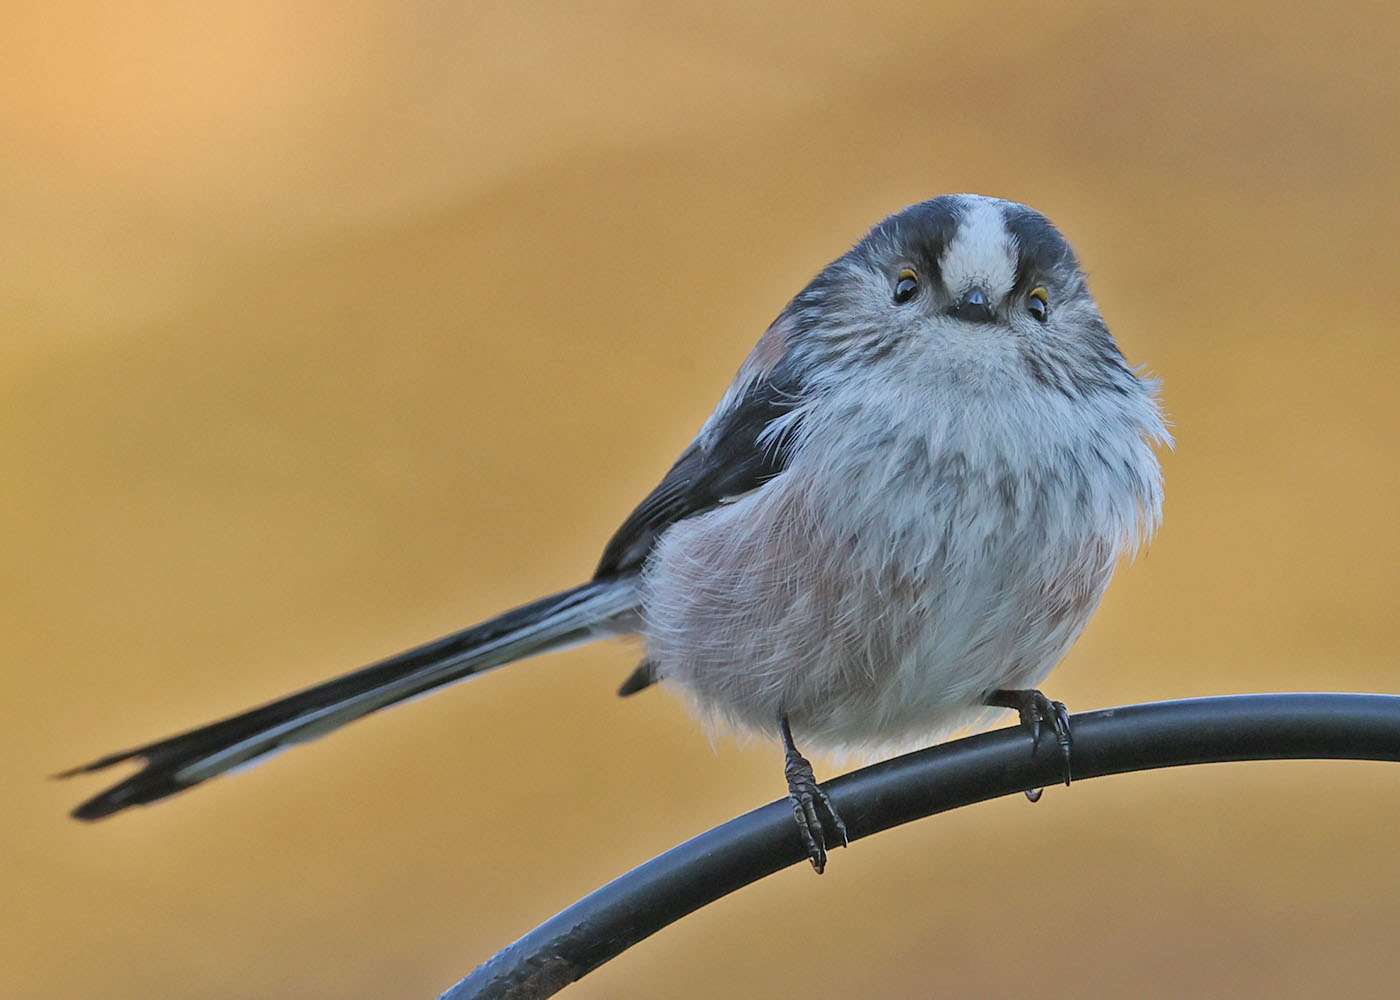 Long-tailed Tit by Steve Hopper at South Brent